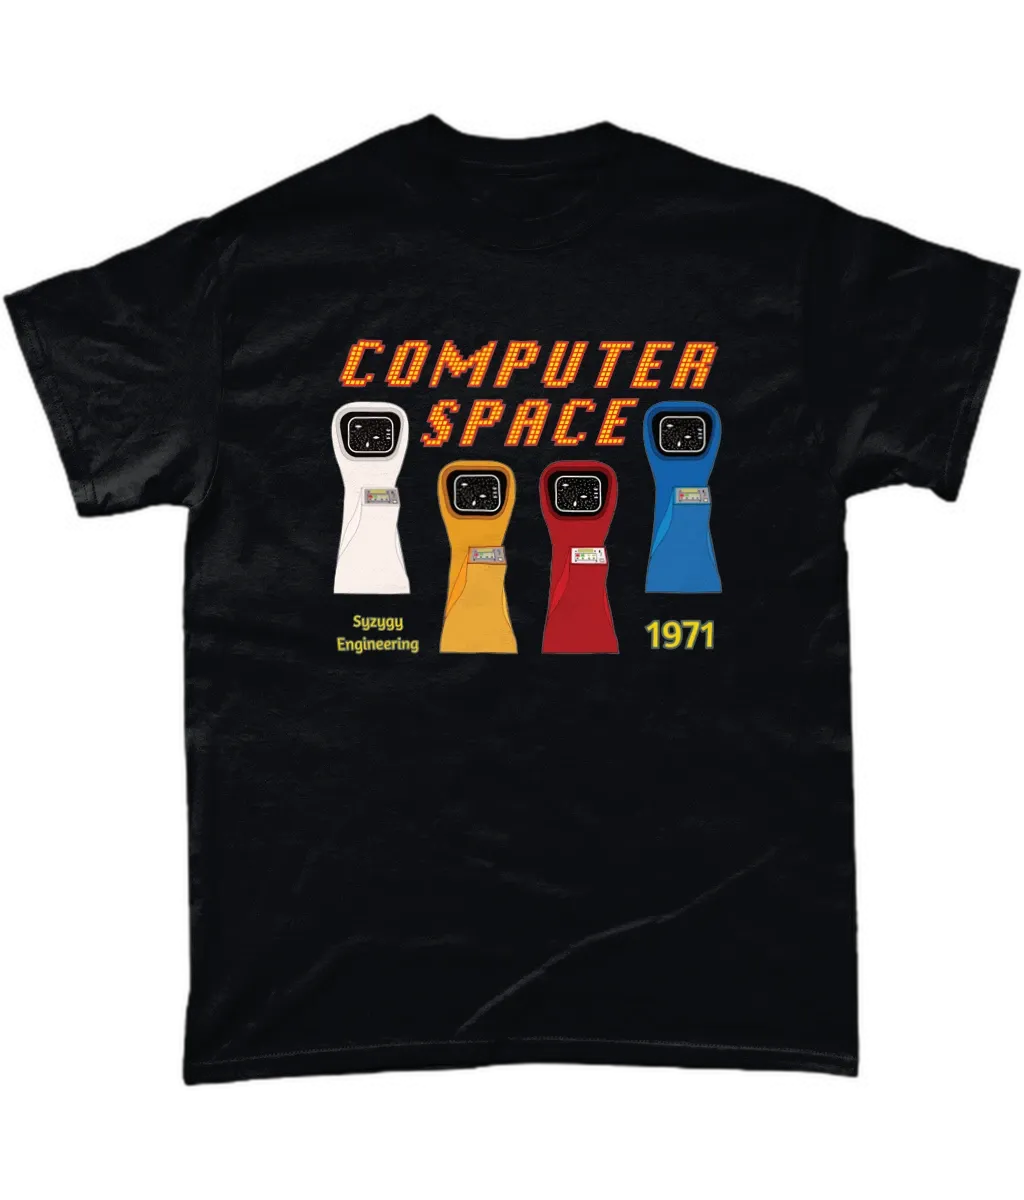 Black T-shirt with computer space written and 4 Arcade machines in their iconic colours,white,yellow,red and blue